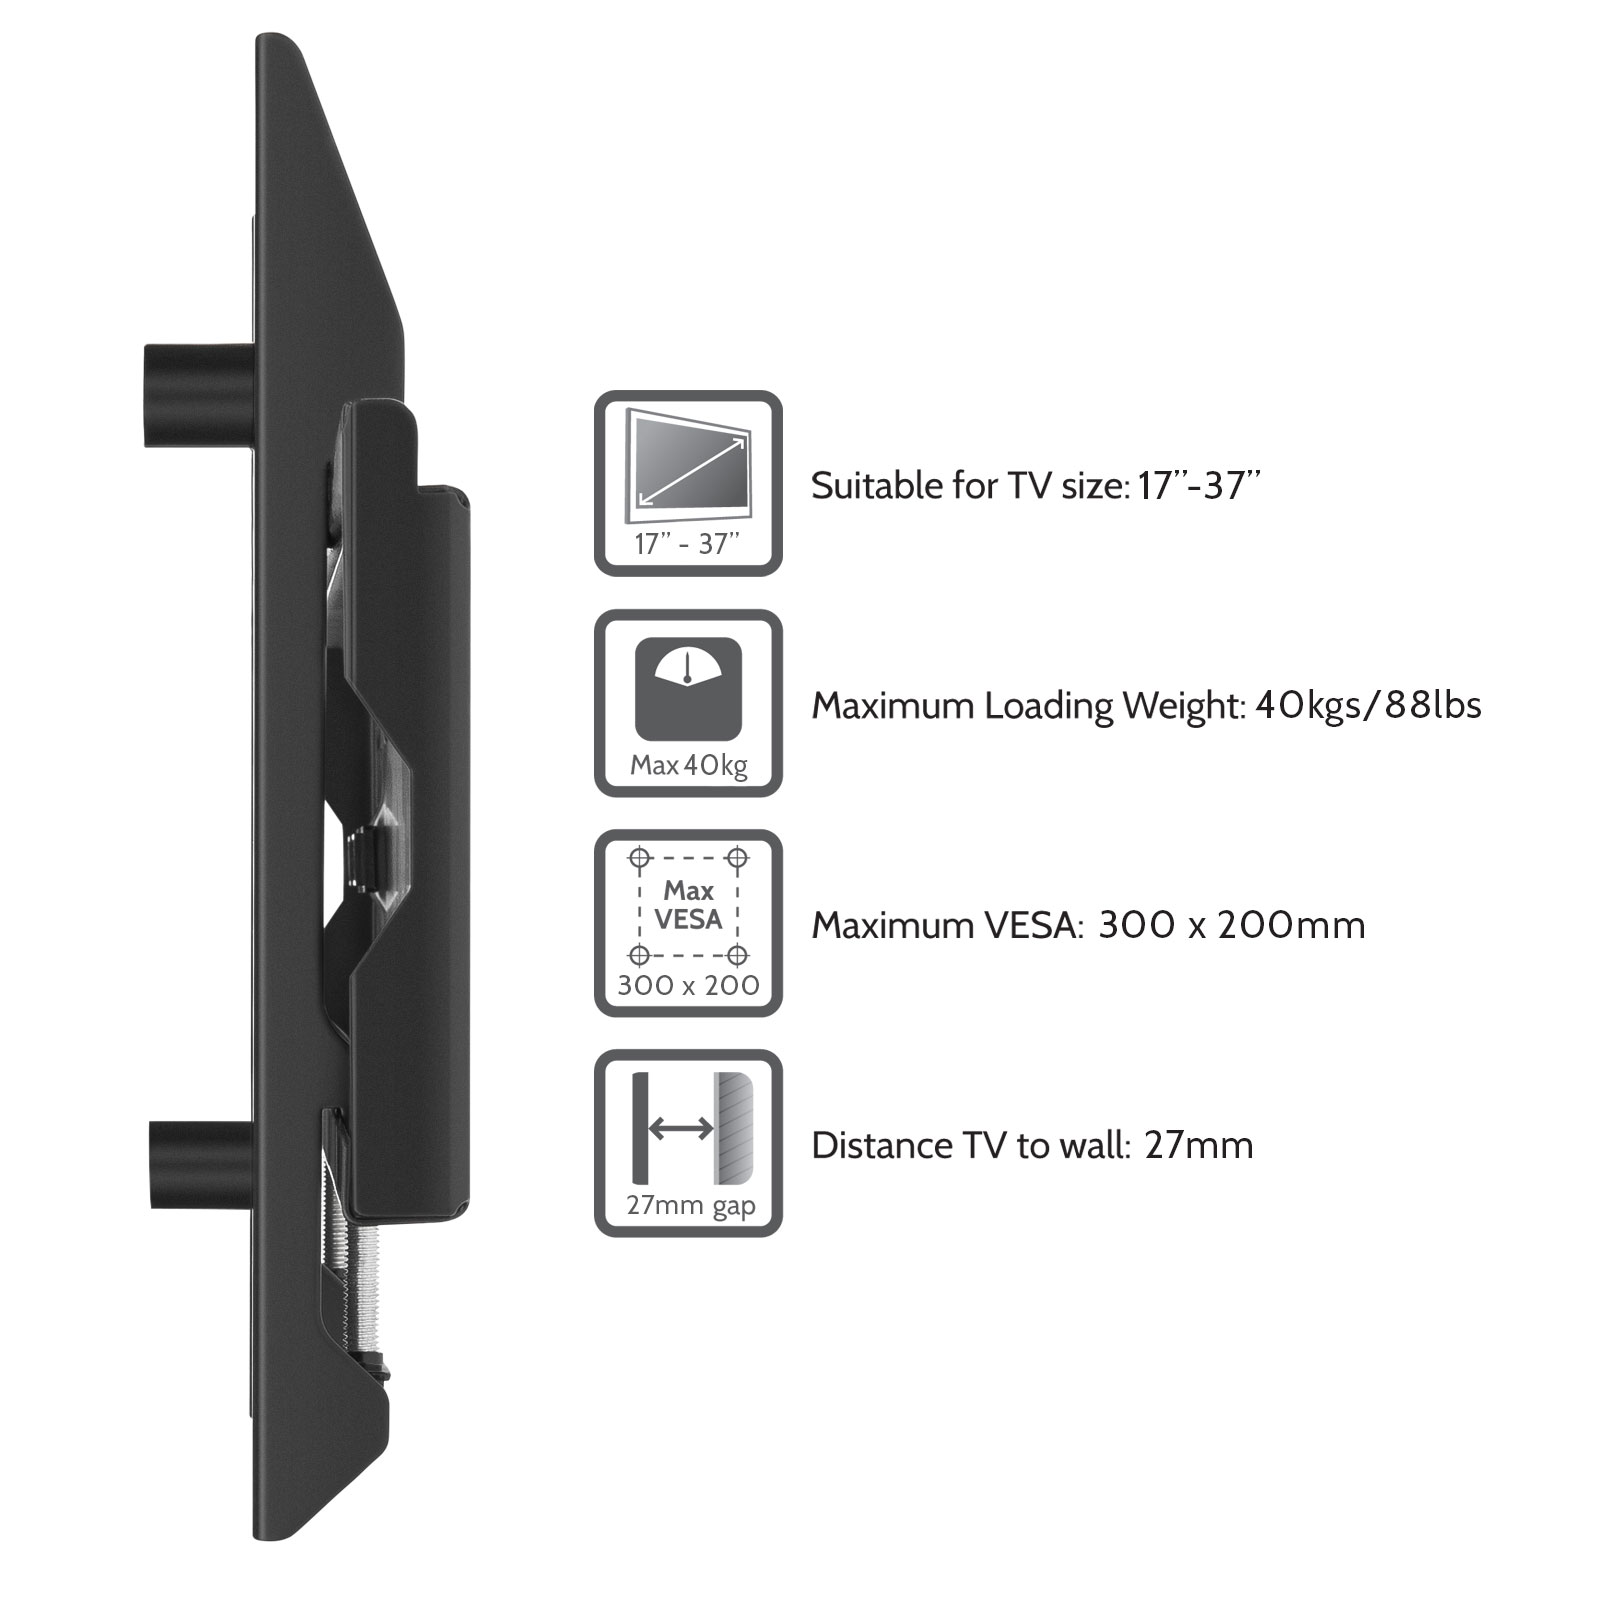 Yousave Accessories Slim Compact Fixed Position TV Wall Mount Bracket for 17